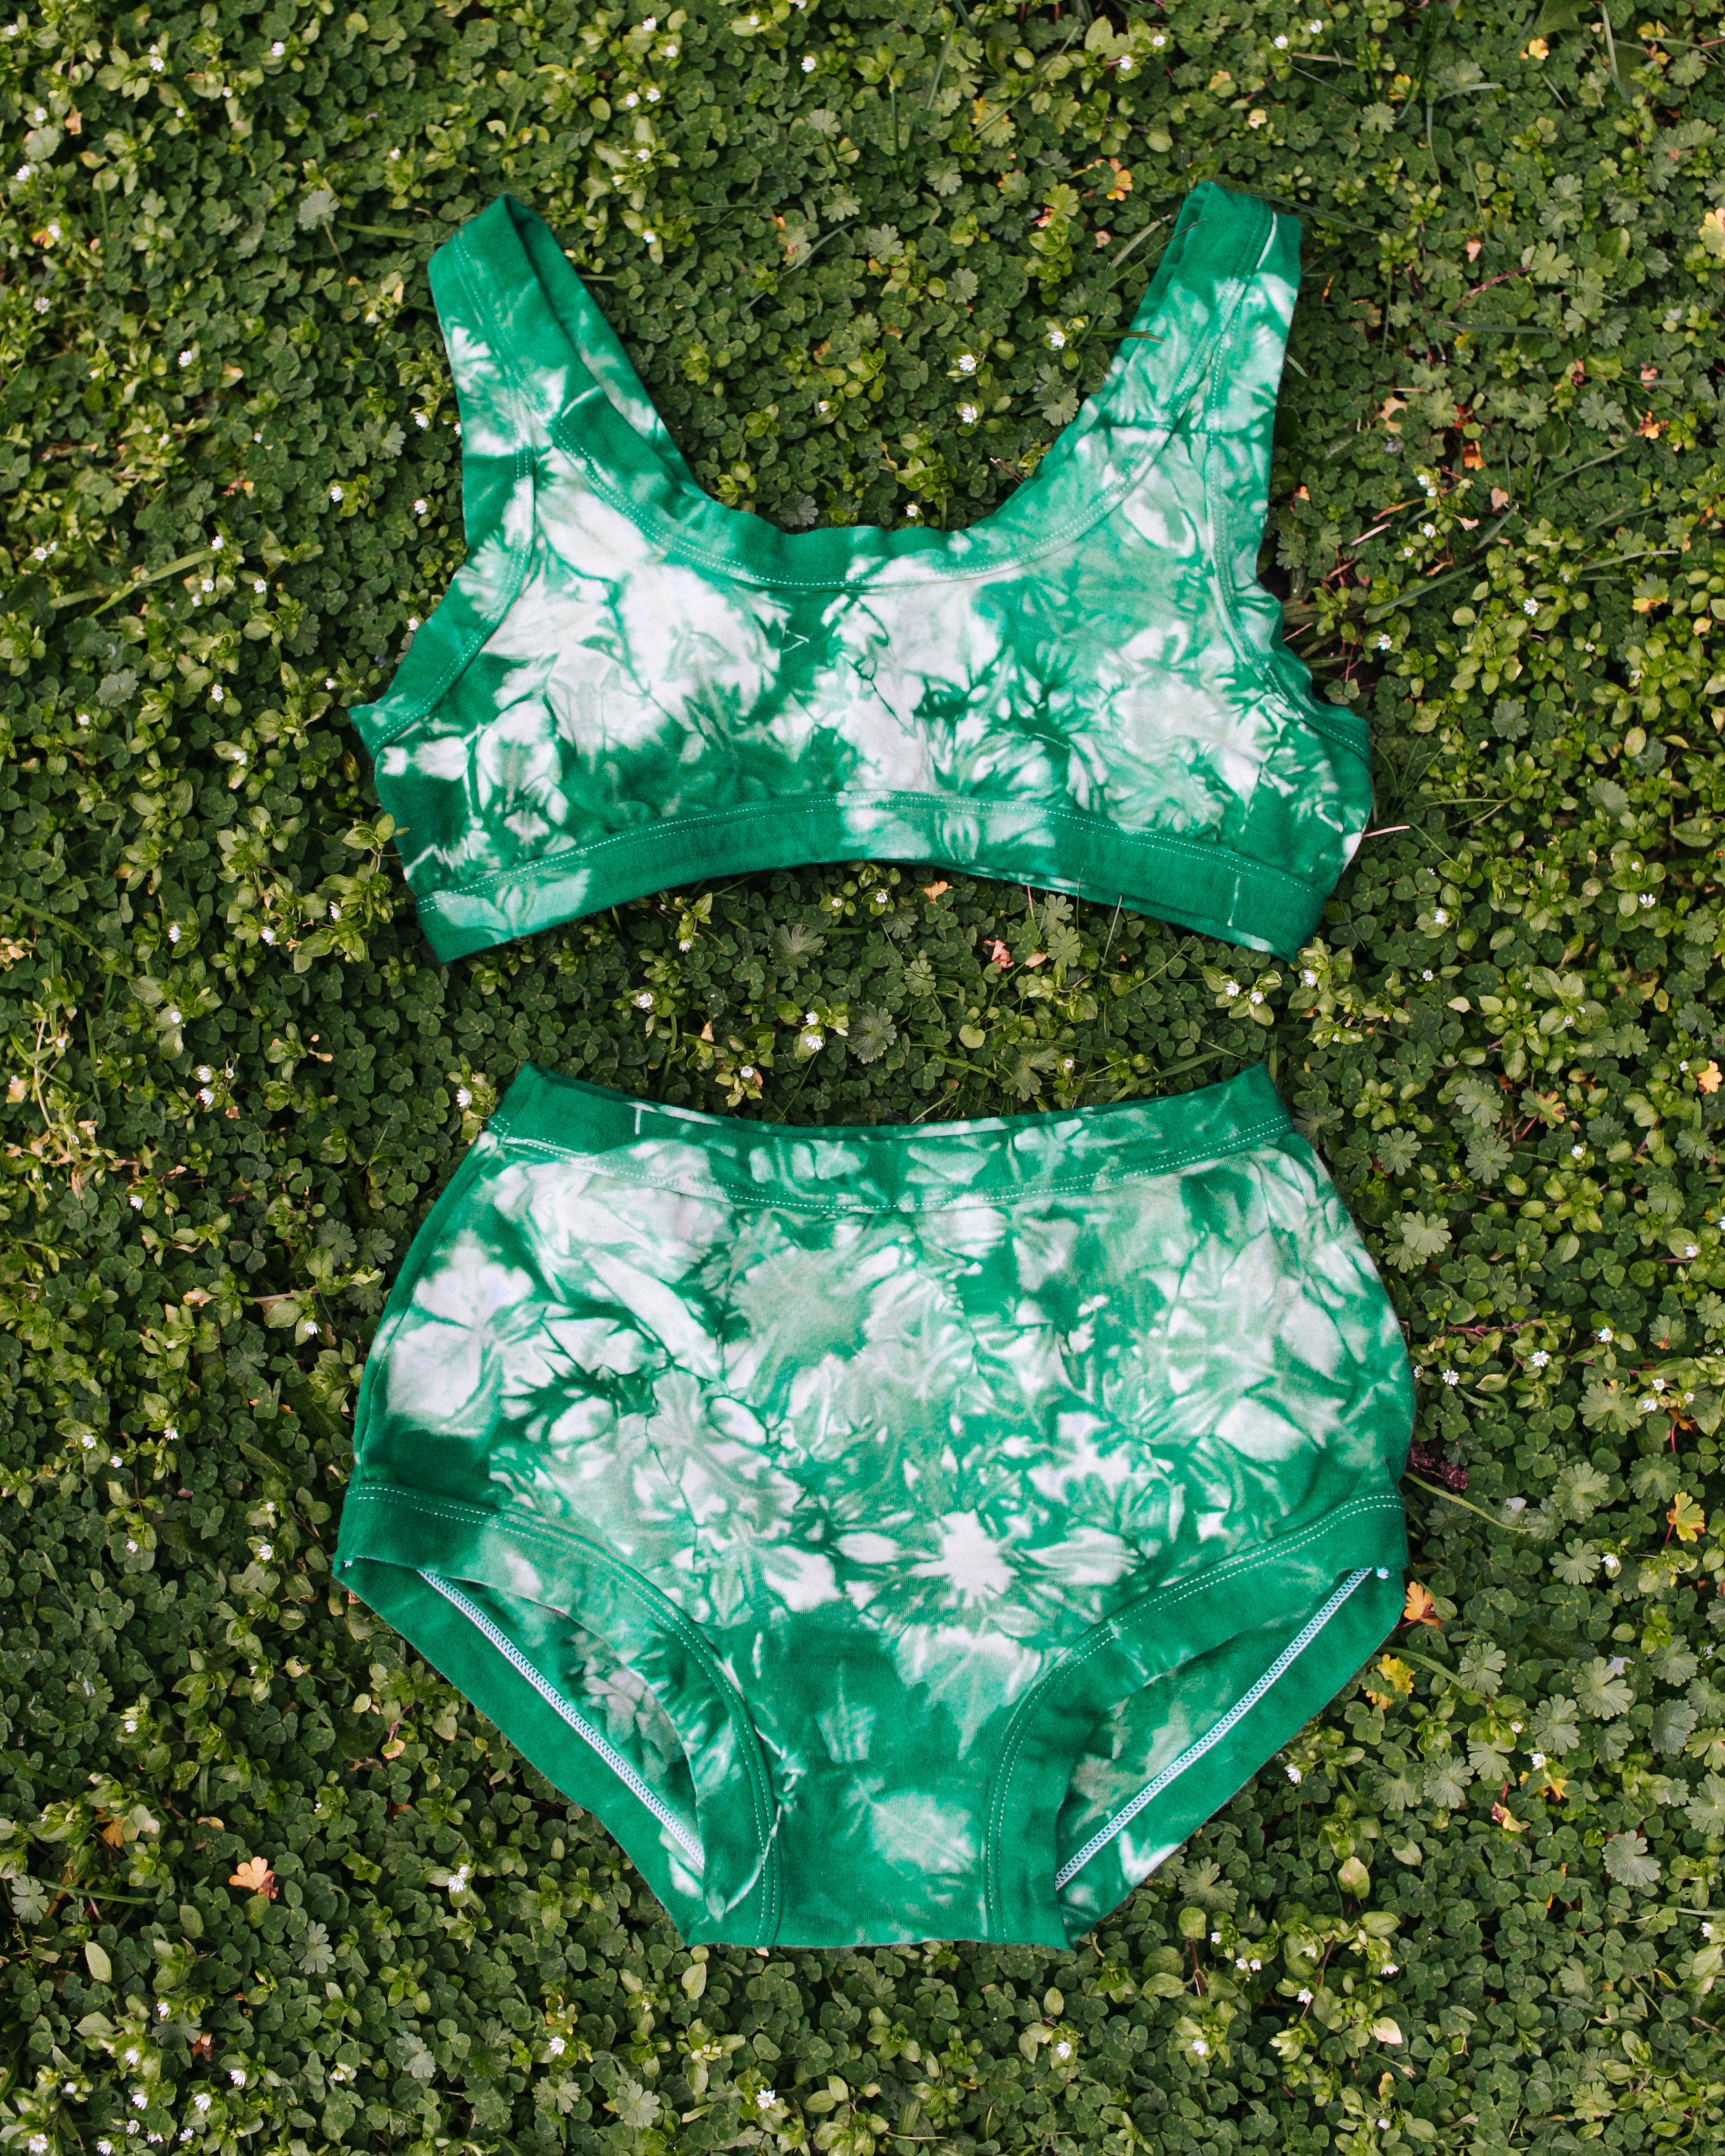 Flat lay of Thunderpants organic cotton Original style underwear and Bralette in Clover Green scrunch dye.